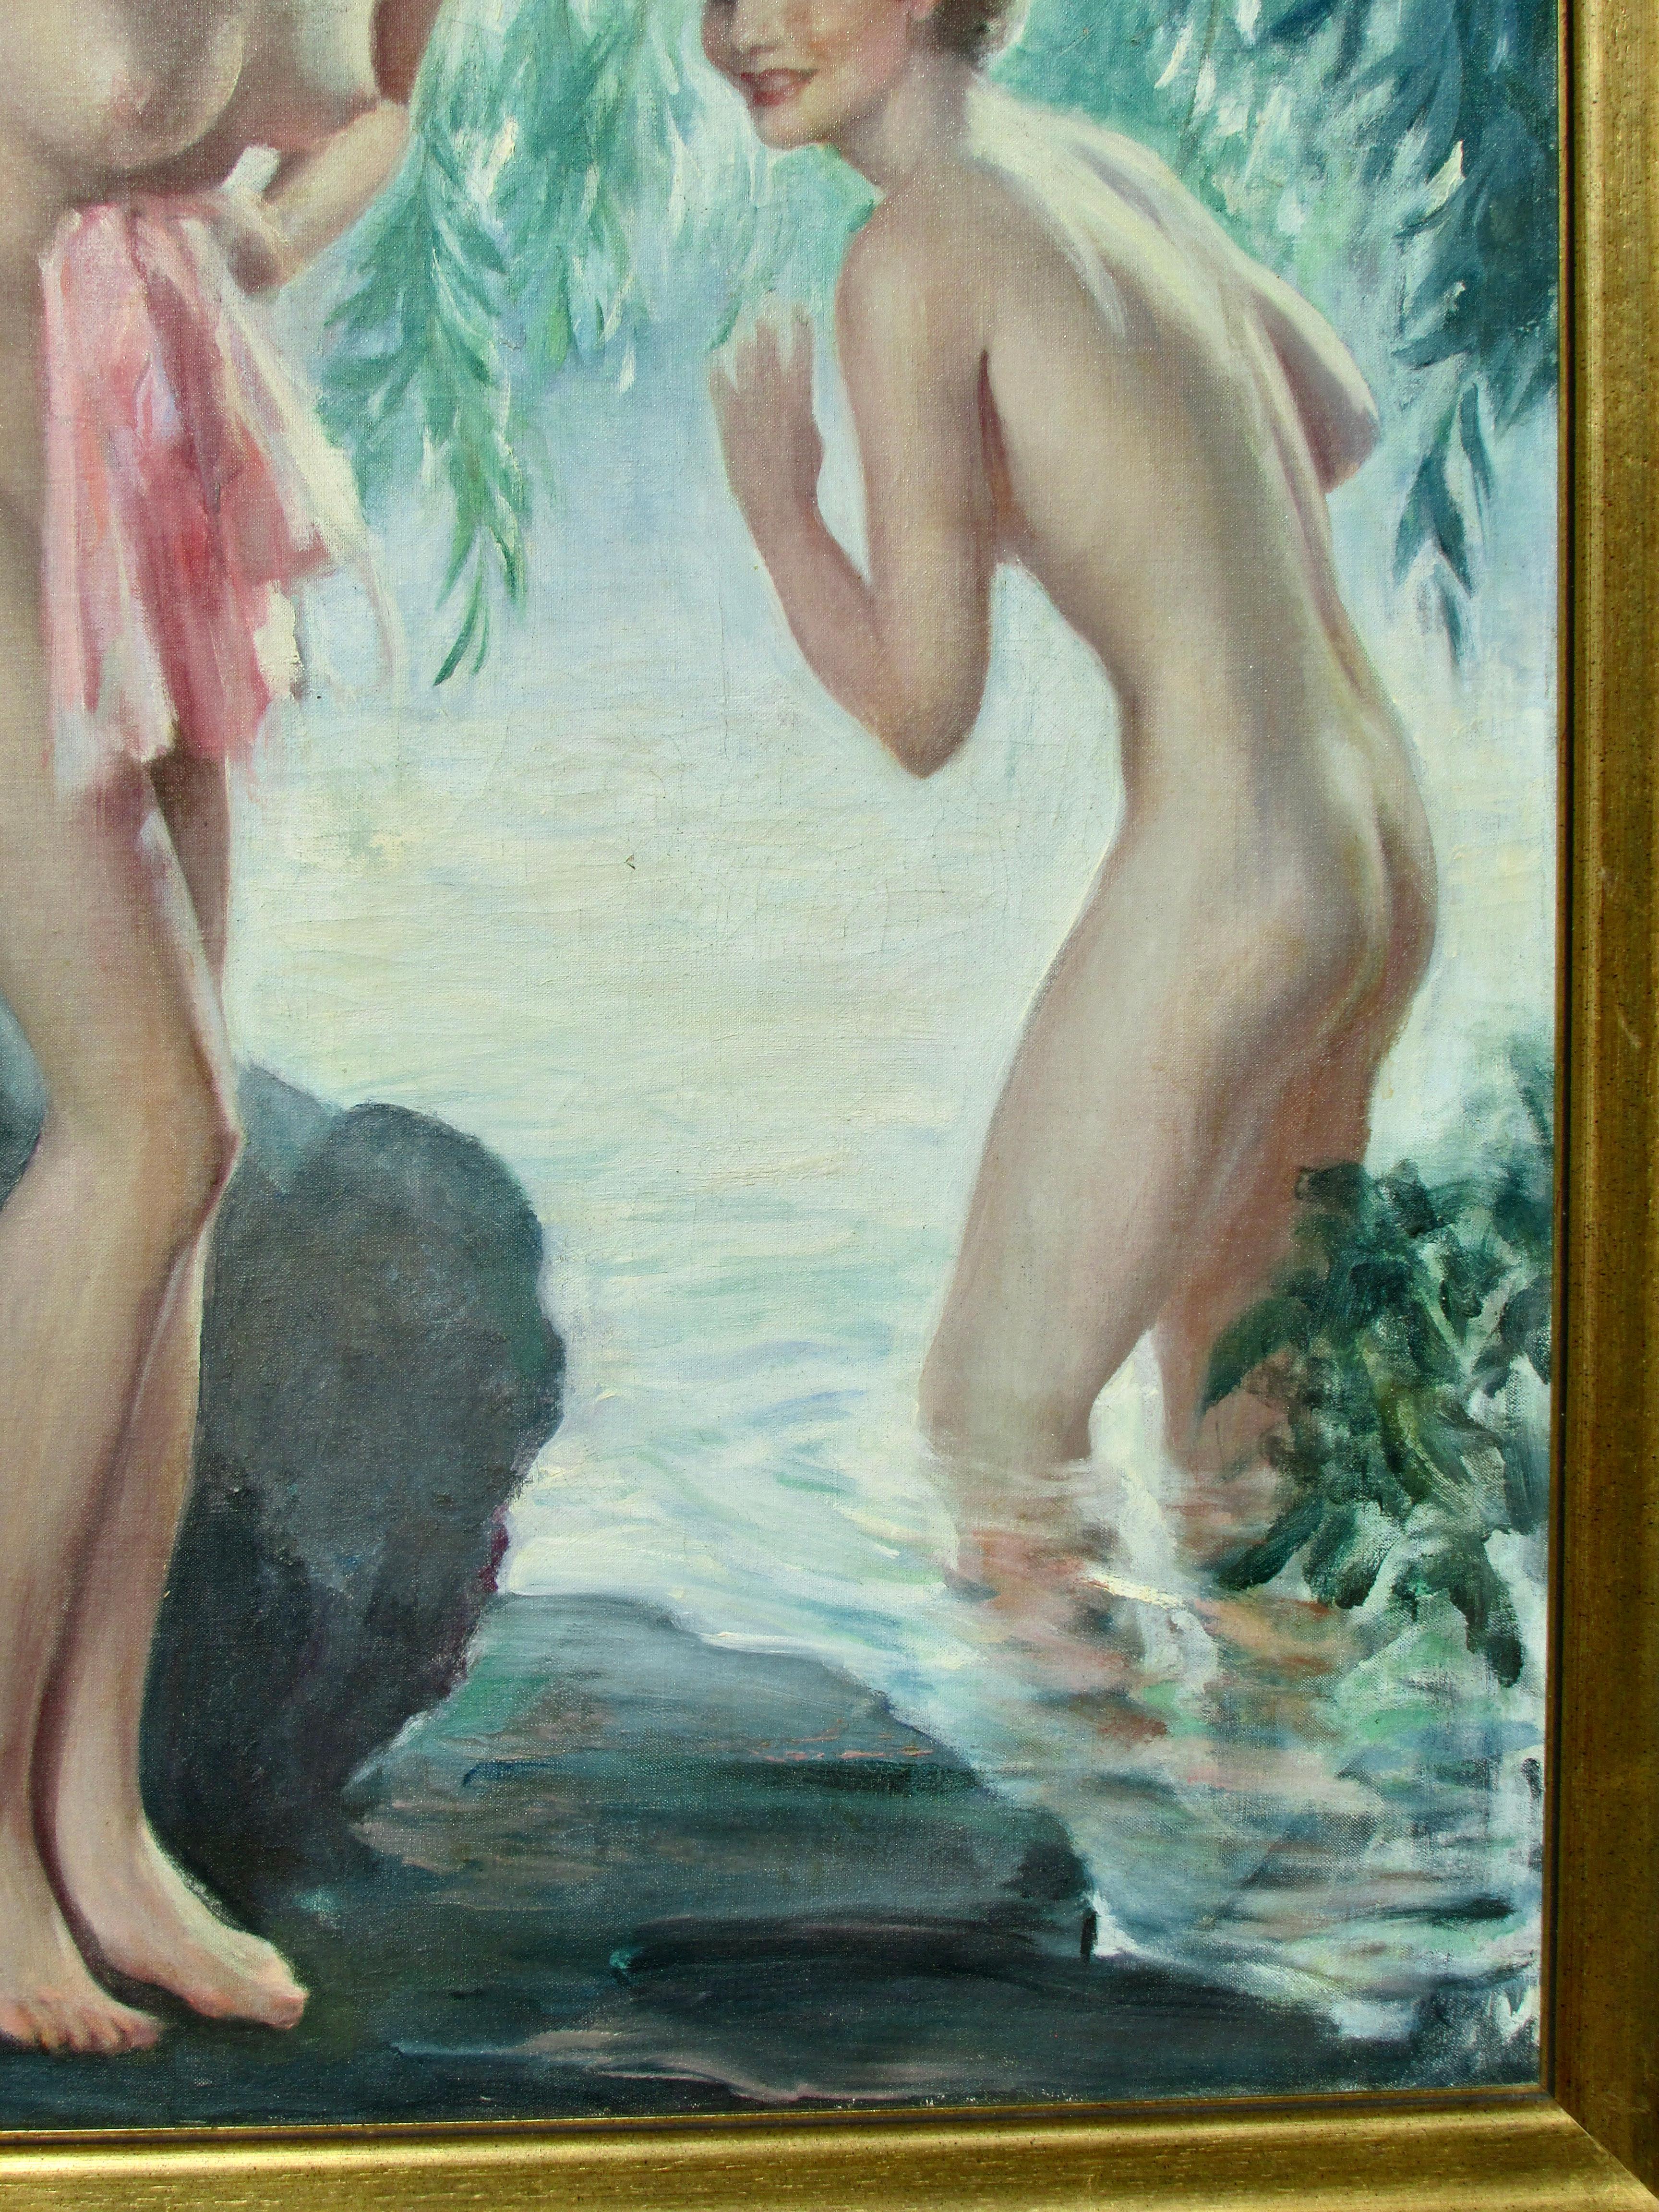 20th Century Bradshaw Crandell Original Water Nymph Illustration Art for Iodent Toothpaste For Sale